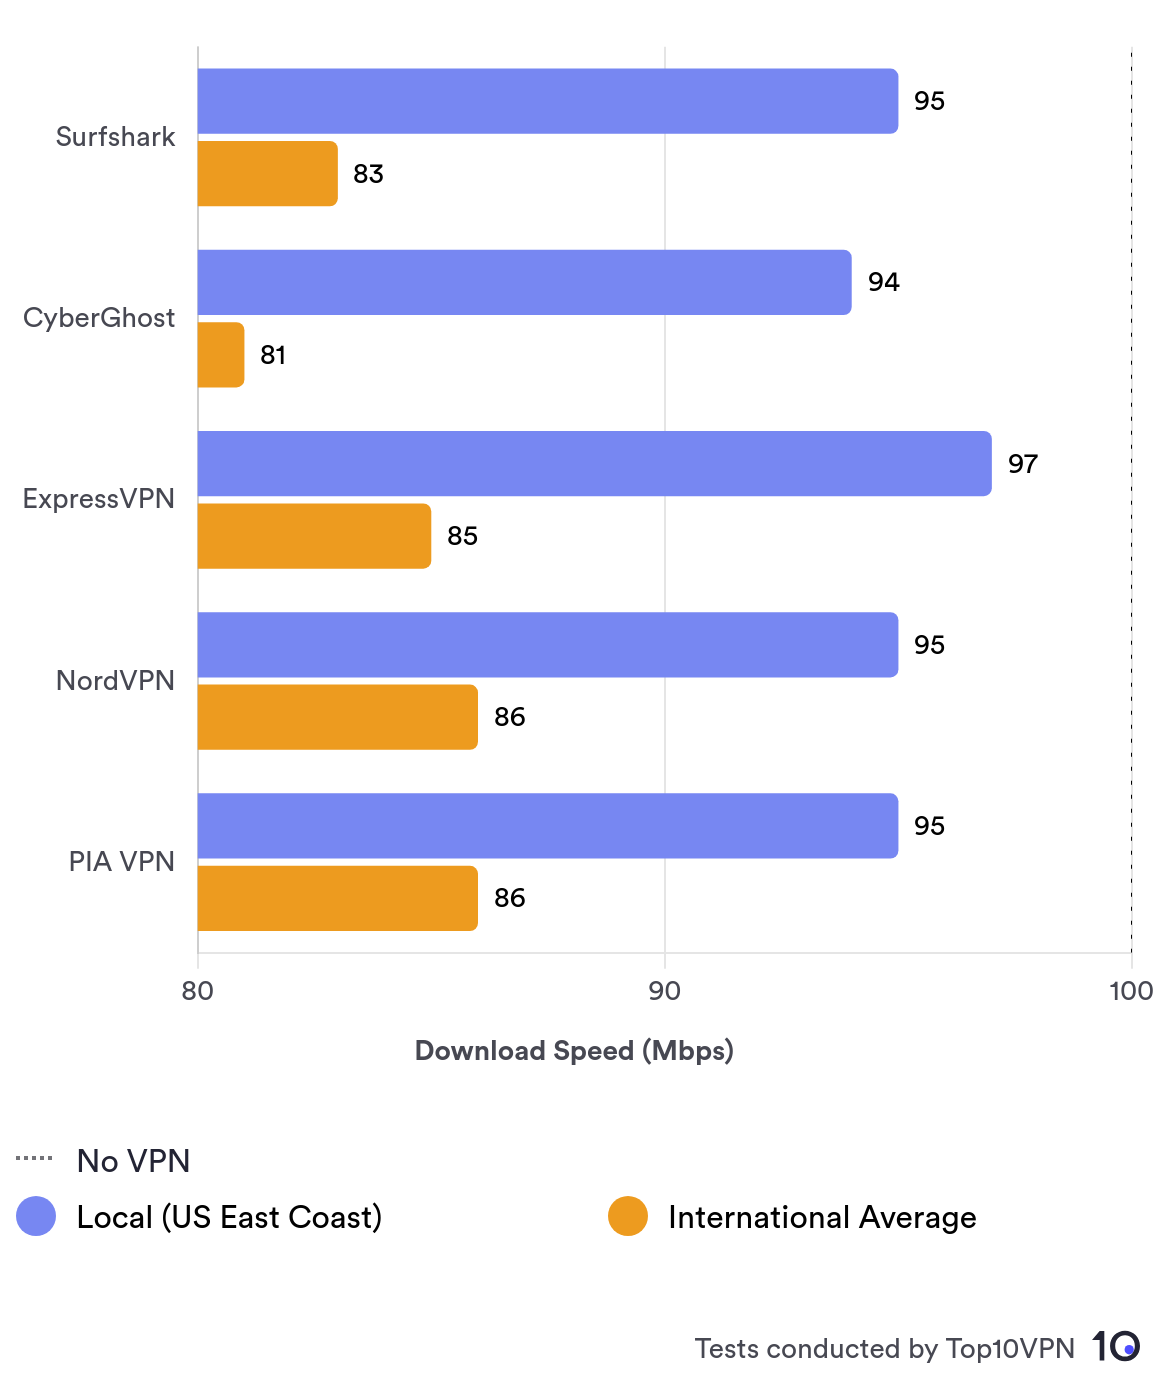 How CyberGhost compares to our top four VPNs both on local connections and in an average of their international connections. Its local speeds are strong, but internationally it lags behind the others.